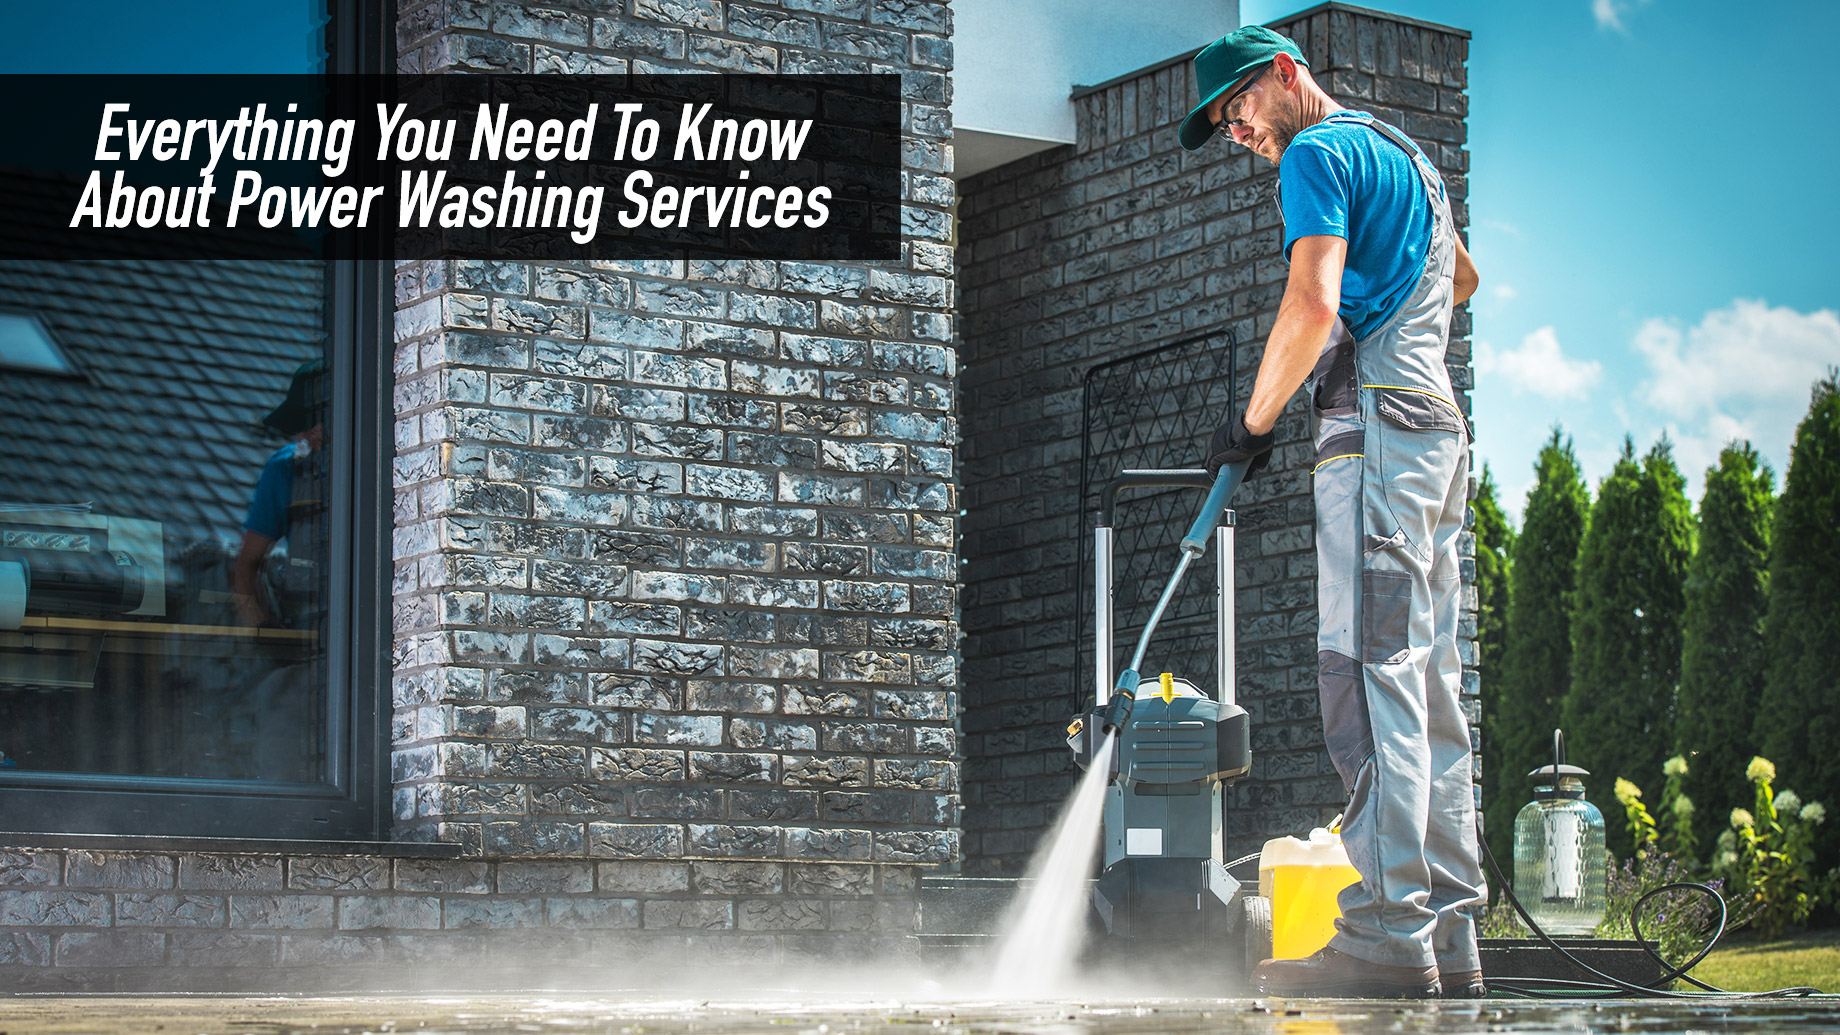 About Heffernan's Home Services Power Washing Service Mccordsville In